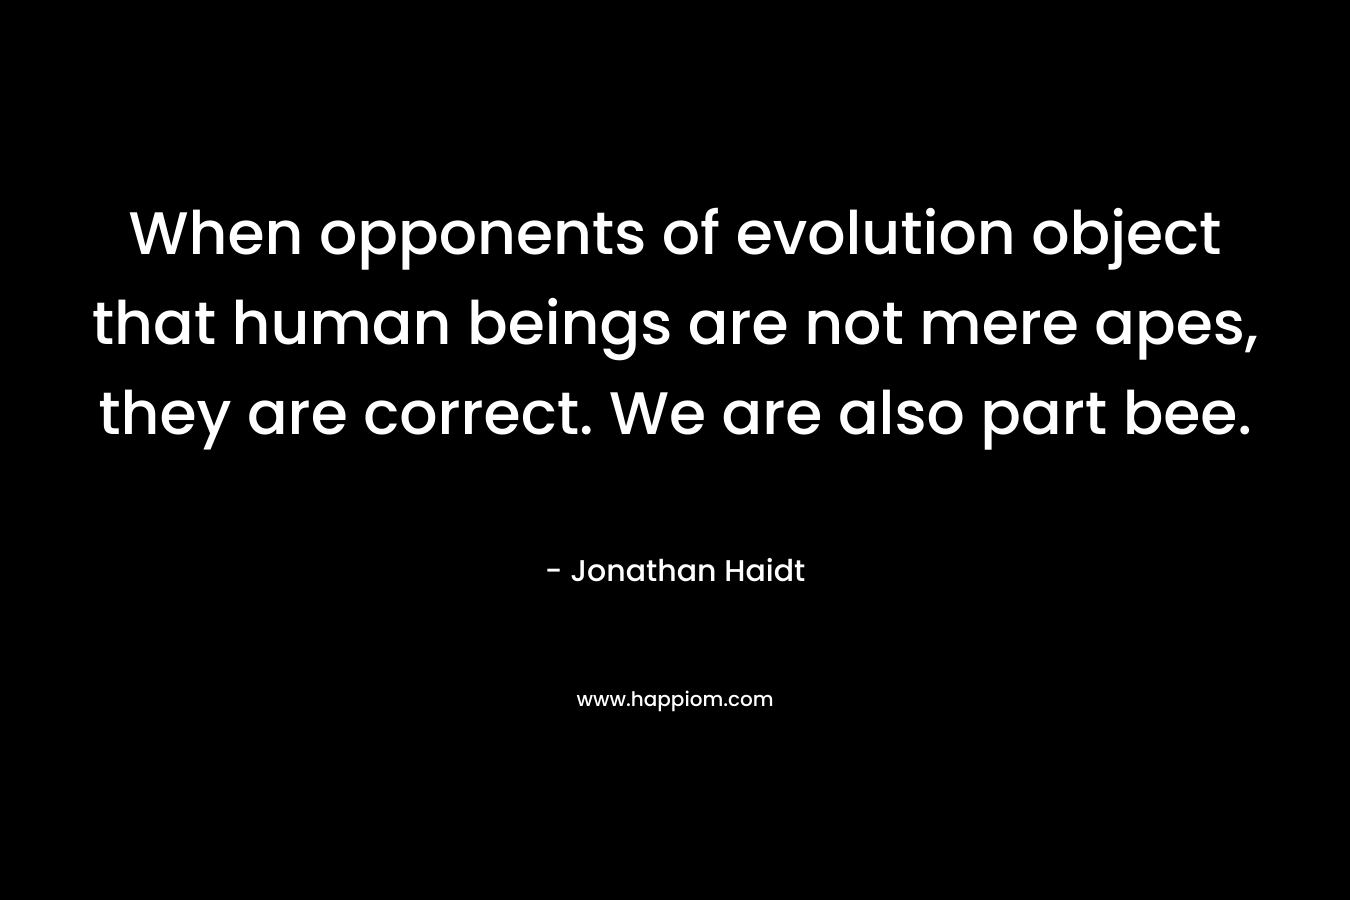 When opponents of evolution object that human beings are not mere apes, they are correct. We are also part bee. – Jonathan Haidt